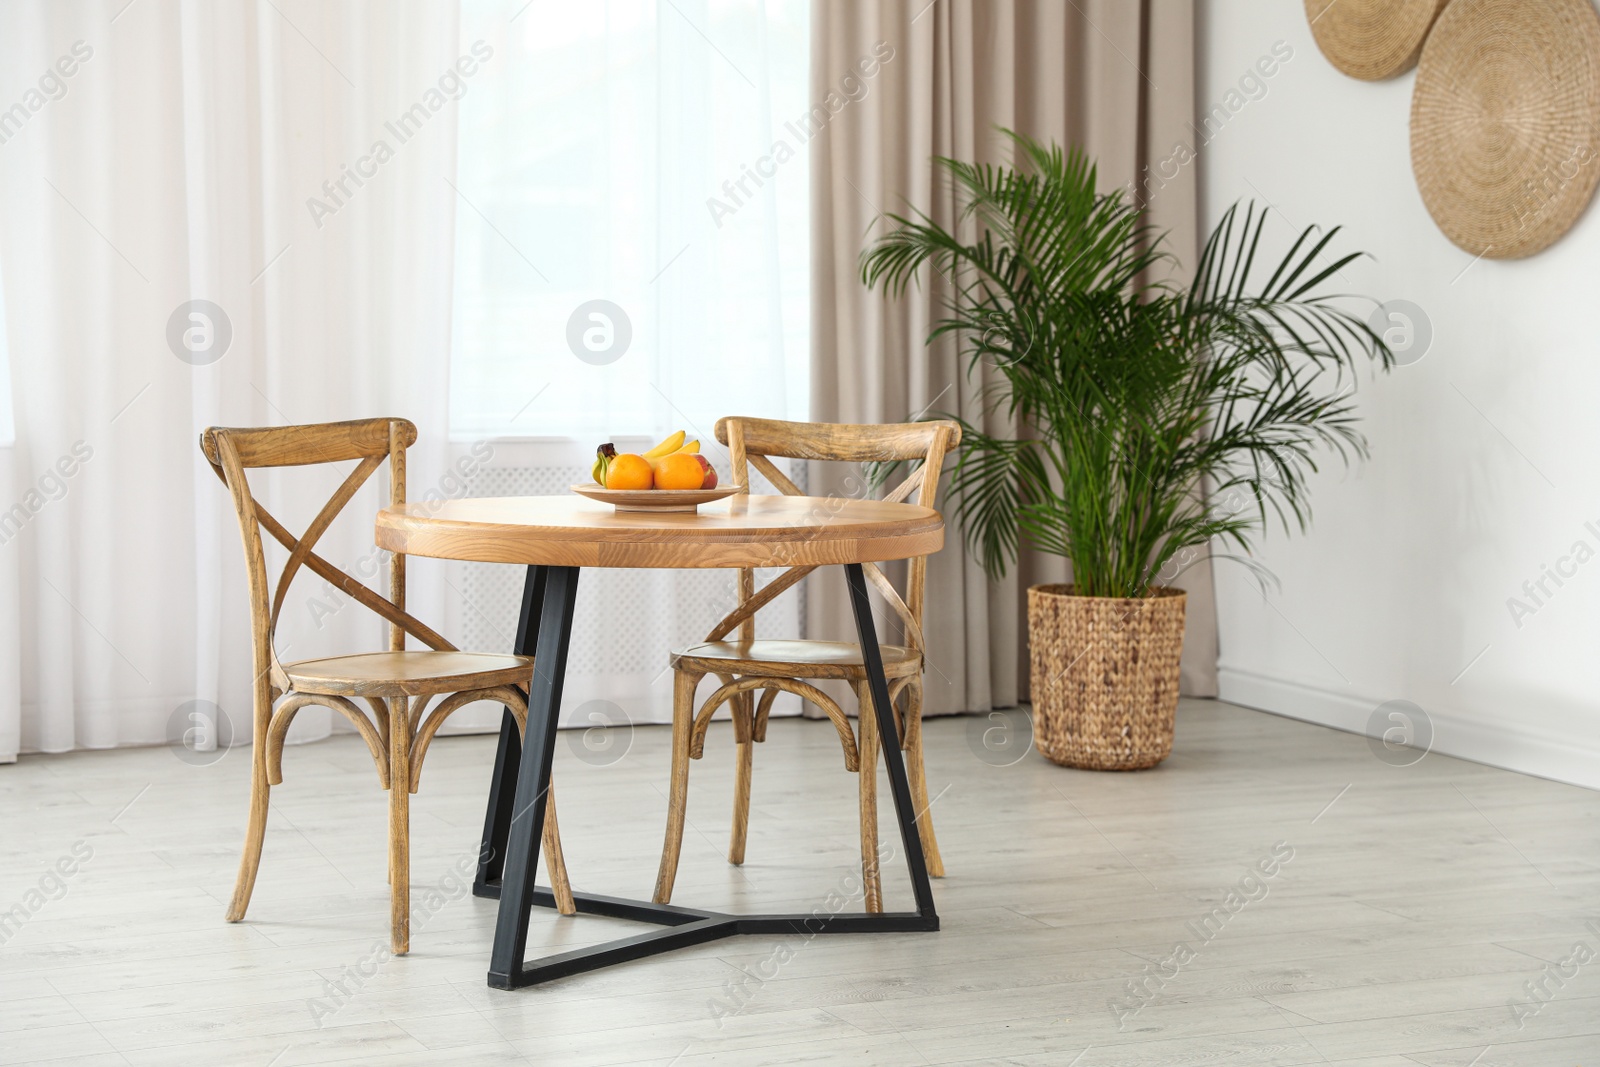 Photo of Stylish room interior with dining table and chairs